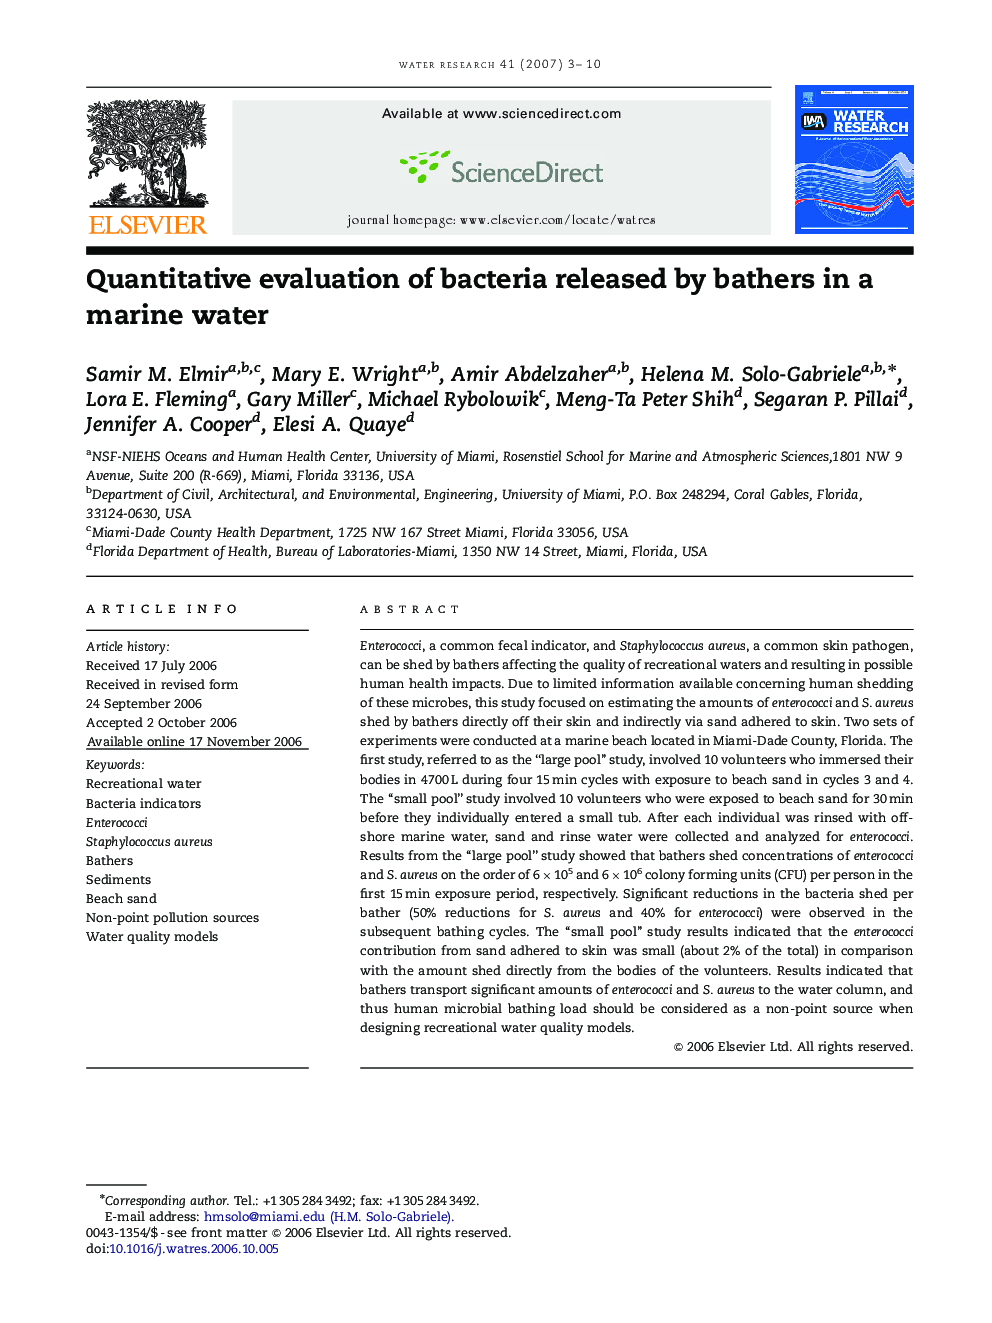 Quantitative evaluation of bacteria released by bathers in a marine water